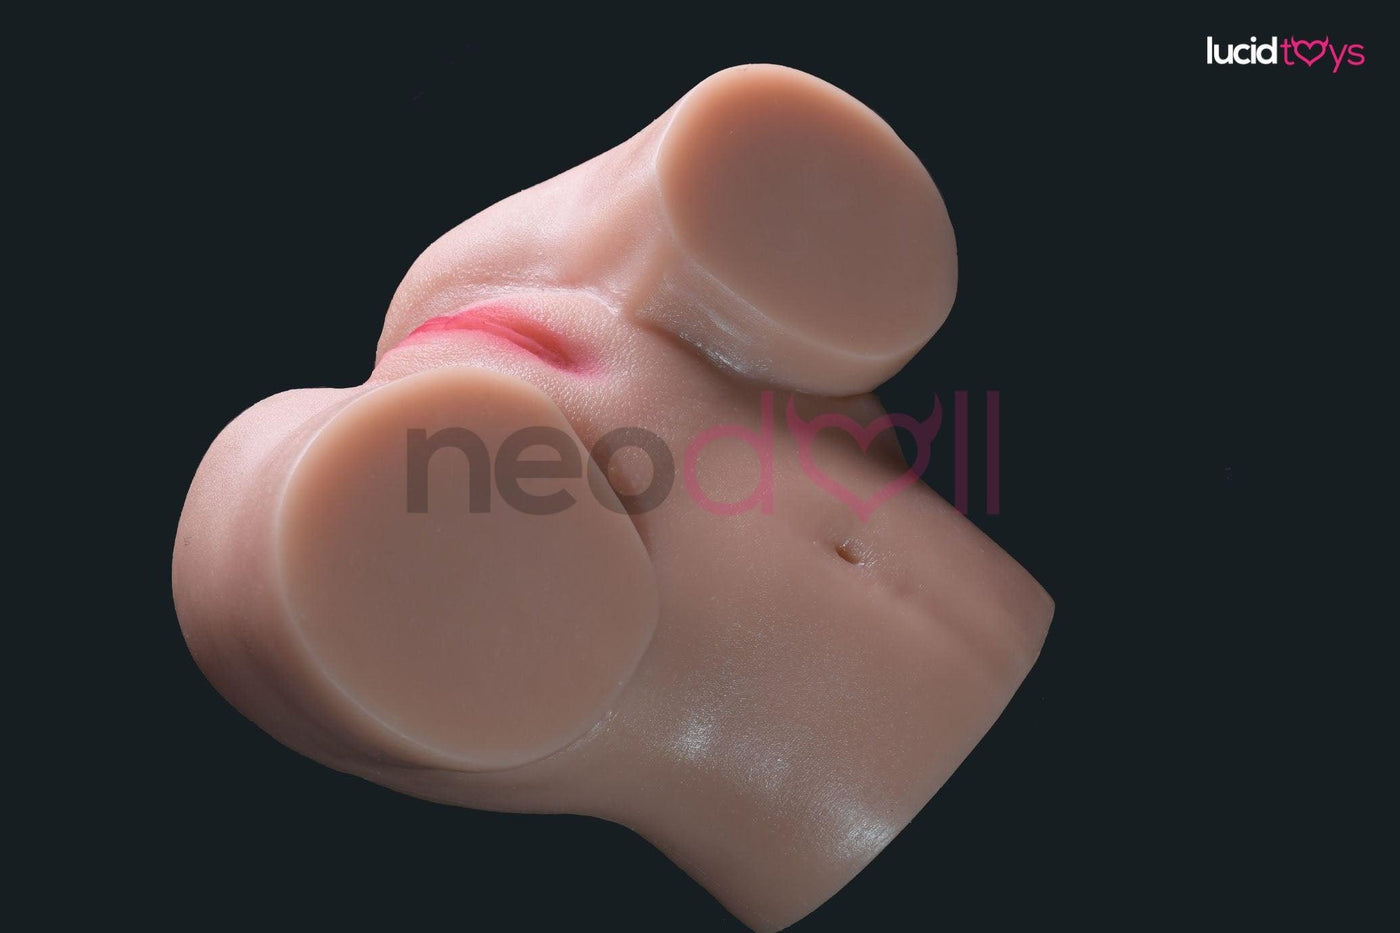 Neodoll Allure - Cute Whole Real Texture Big Butt - 2.4kg - Tan - Lucidtoys